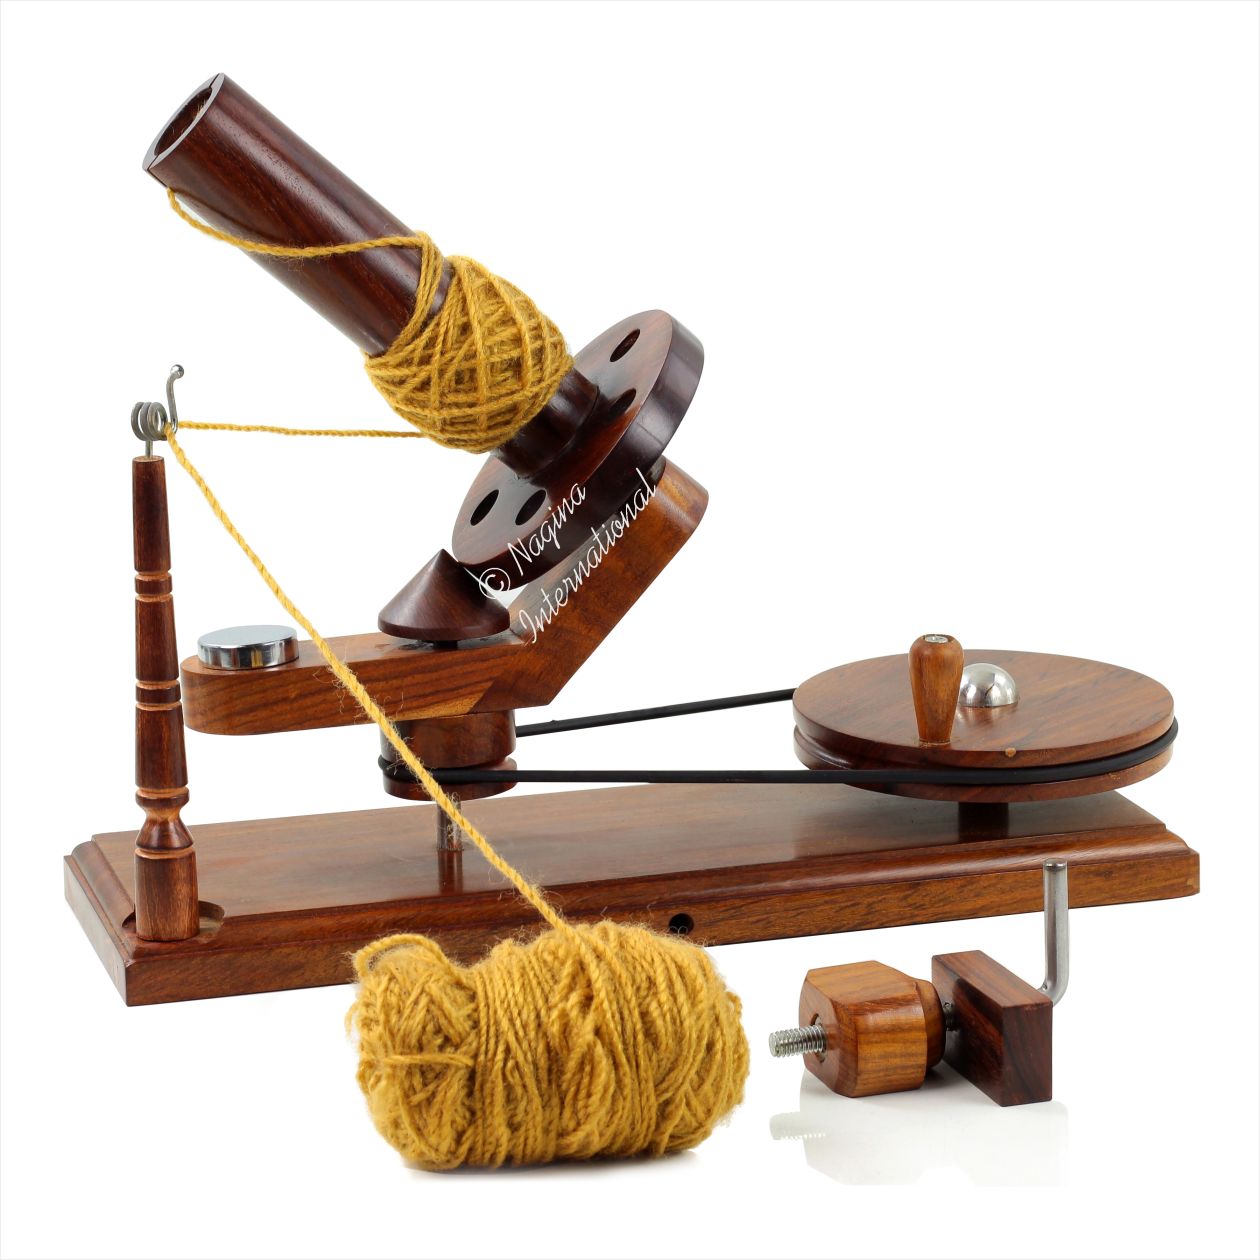 Hand Operated Wooden Yarn Winder and Yarn Swift, Wool, Speedy Ball Winder  and String Holder Knitting Crochet Accessories Knitter's Gift 